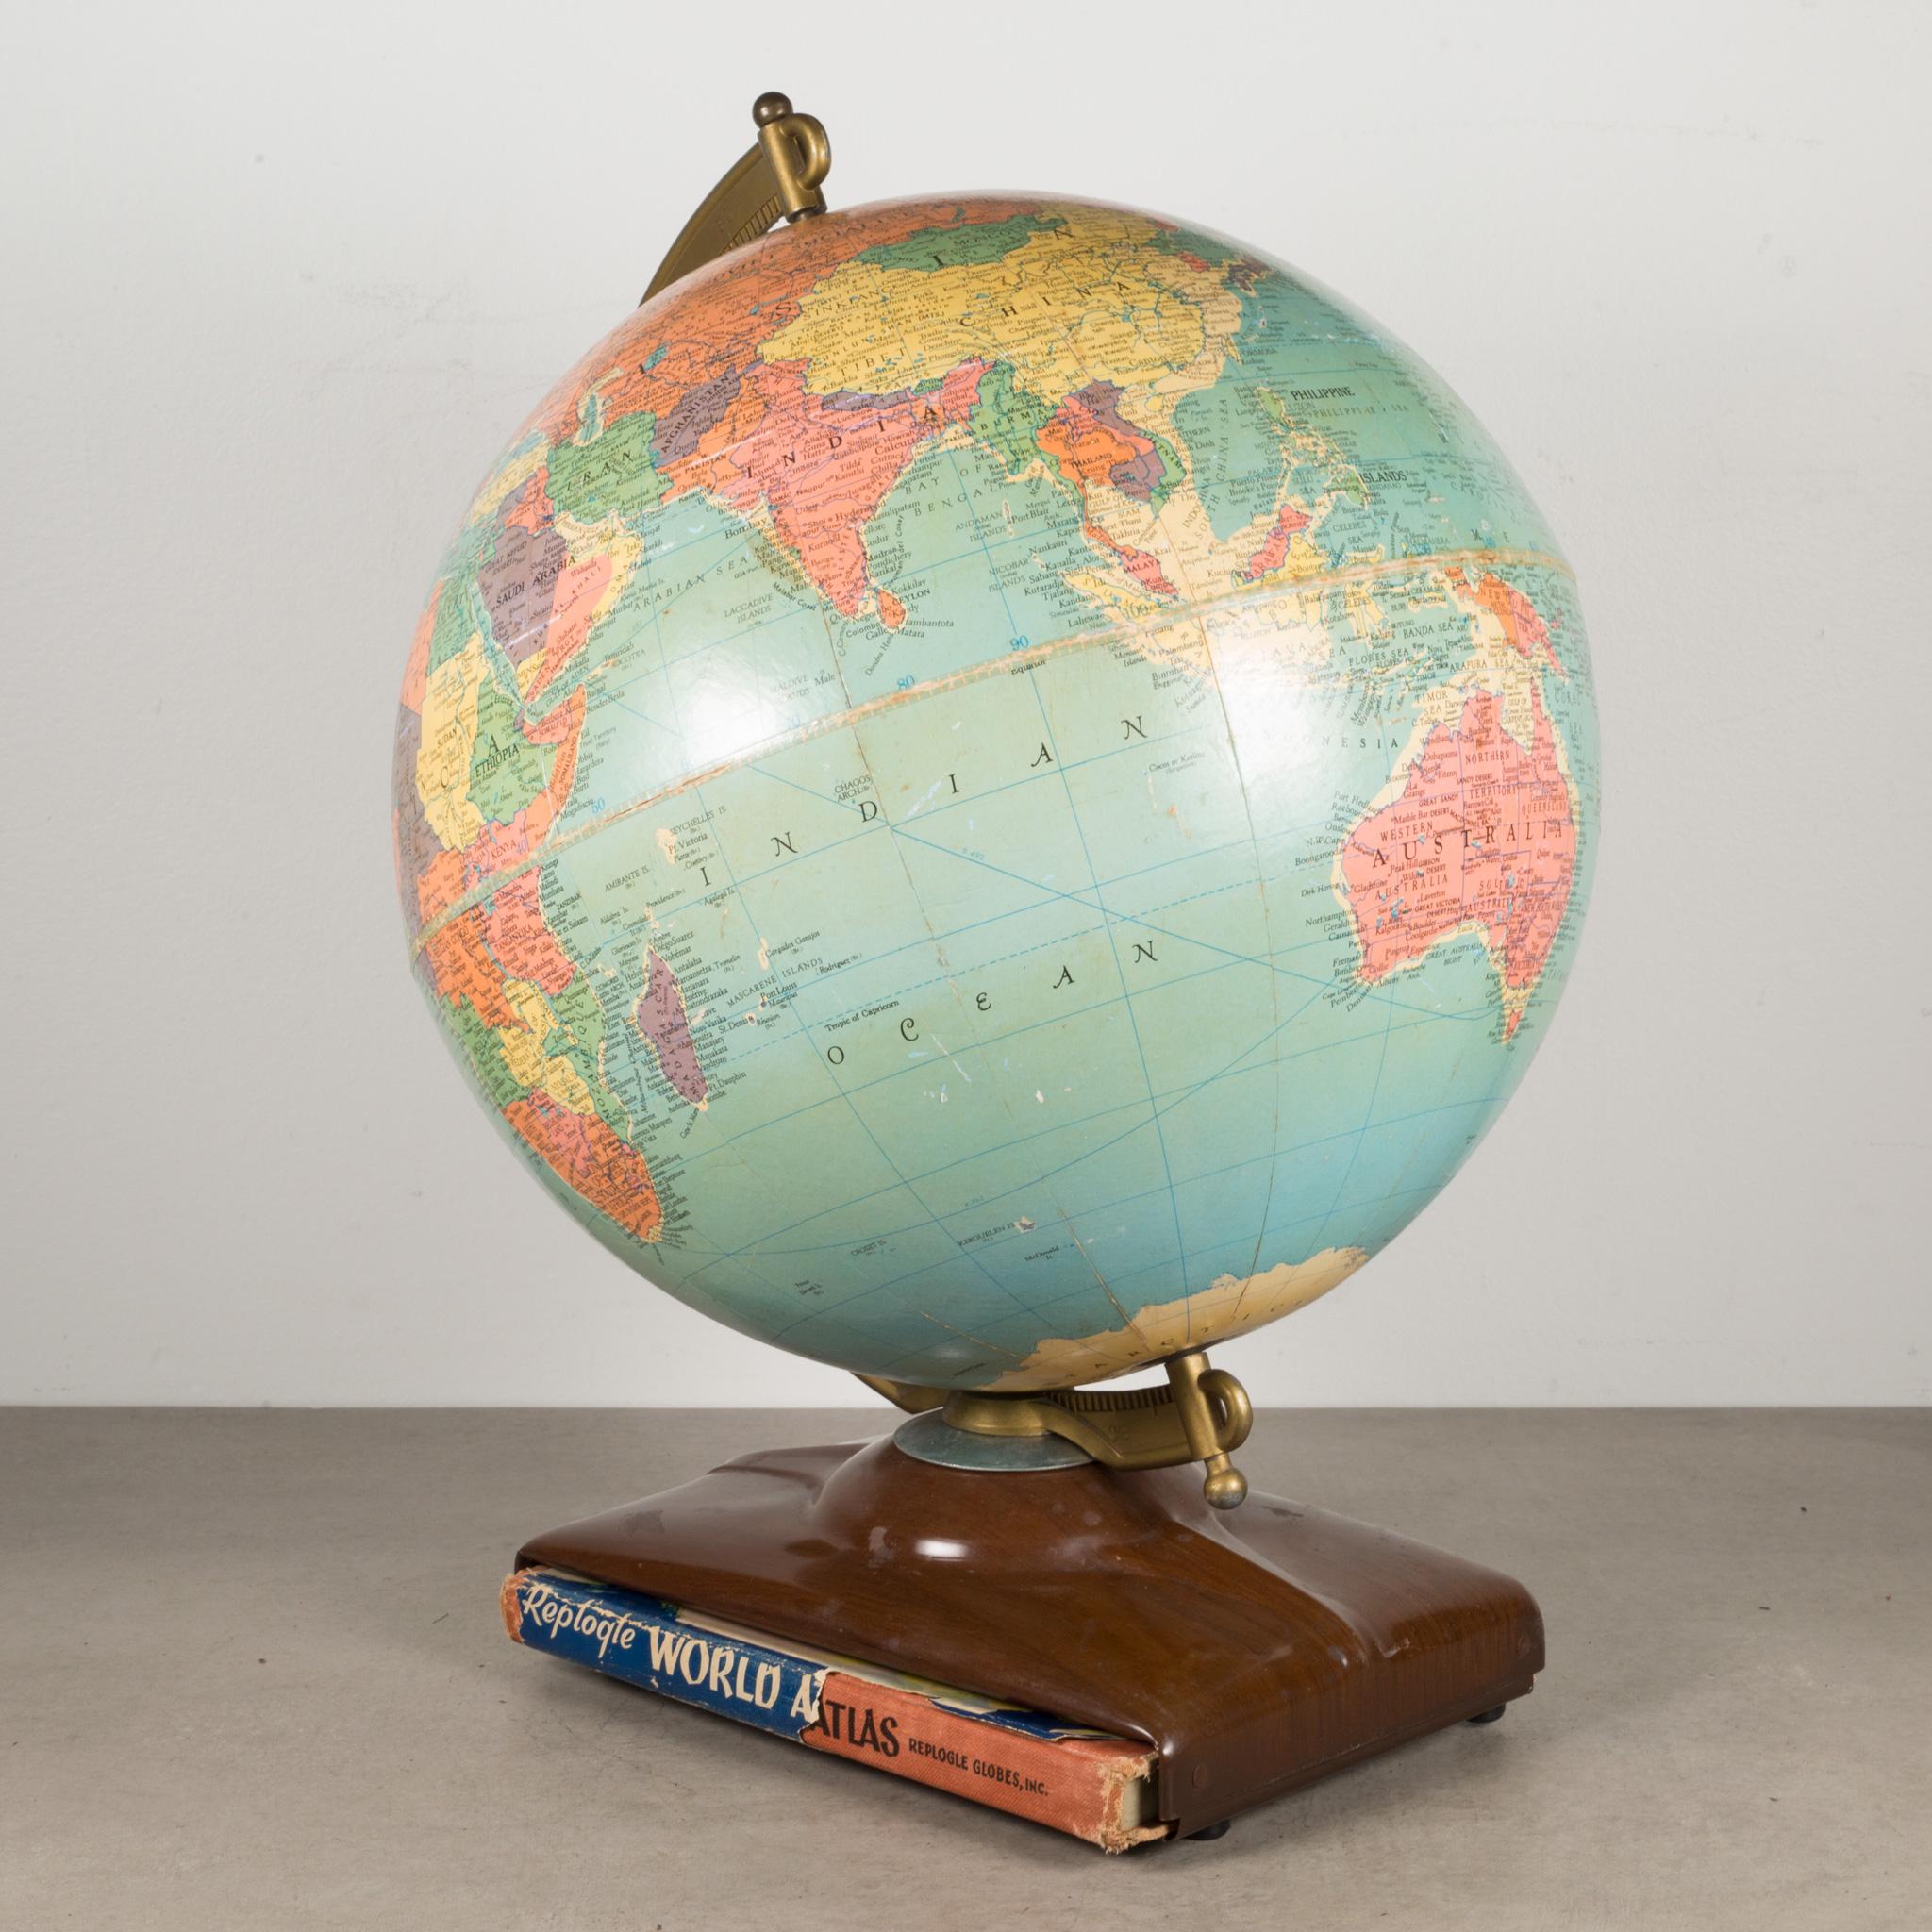 ABOUT

A replogle standard globe with a metal bracket mounted on a metal pedestal. The original atlas slides into the base.

 CREATOR Replogle.
 DATE OF MANUFACTURE c.1961-1964.
 MATERIALS AND TECHNIQUES Metal, Paper.
 CONDITION Good. Wear